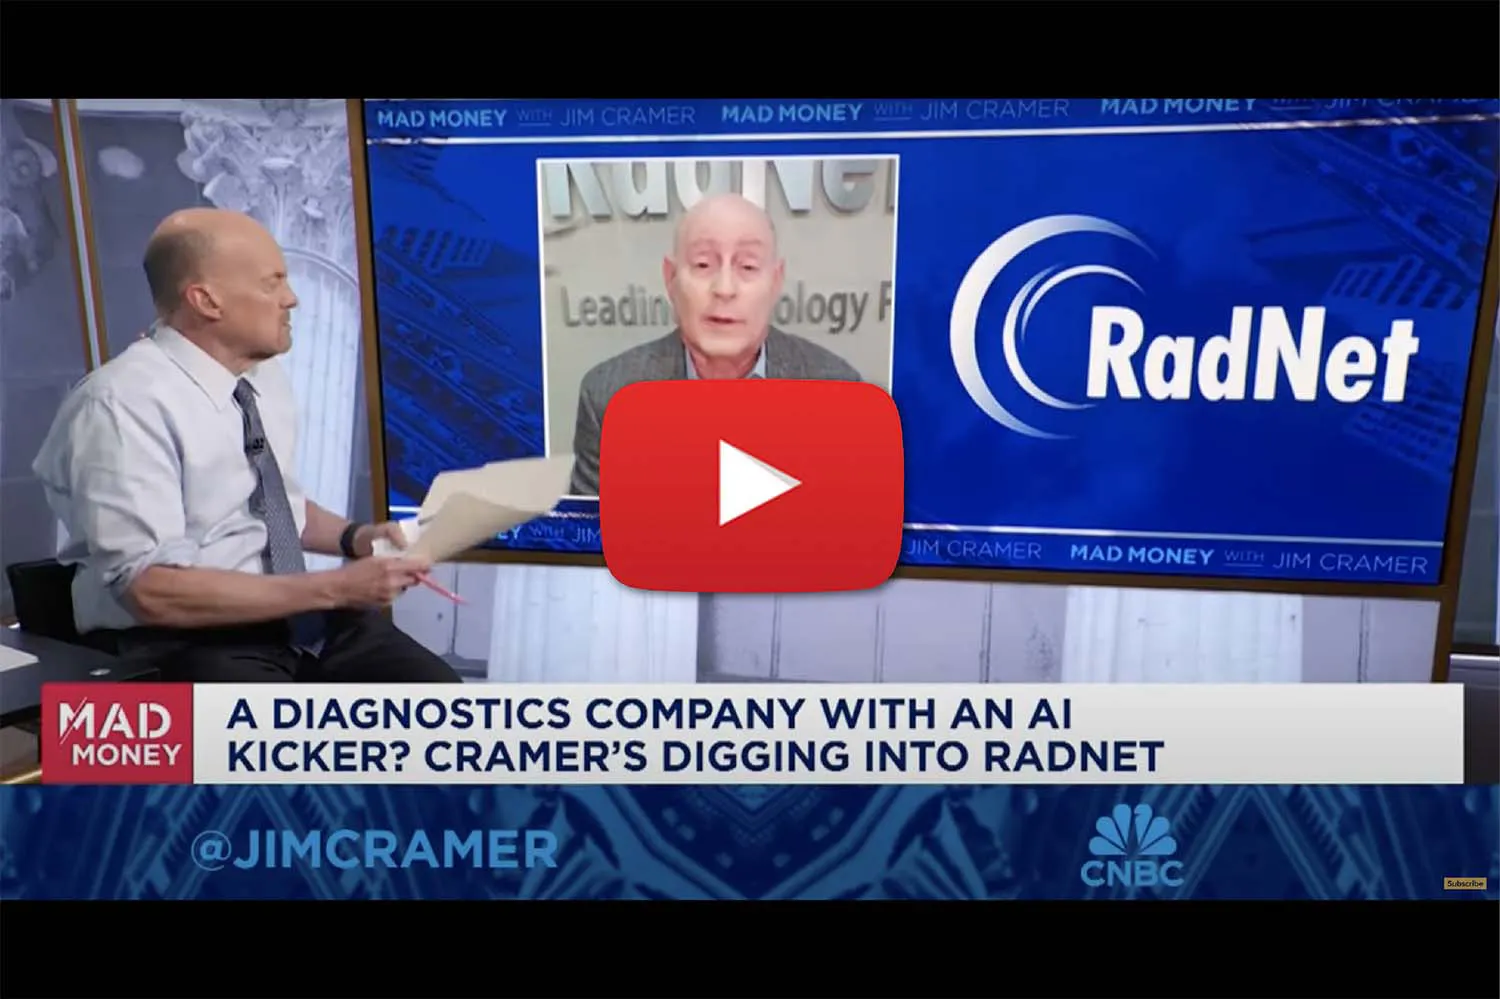 CNBC Television, Radnet CEO Howard Berger goes one-on-one with Jim Cramer